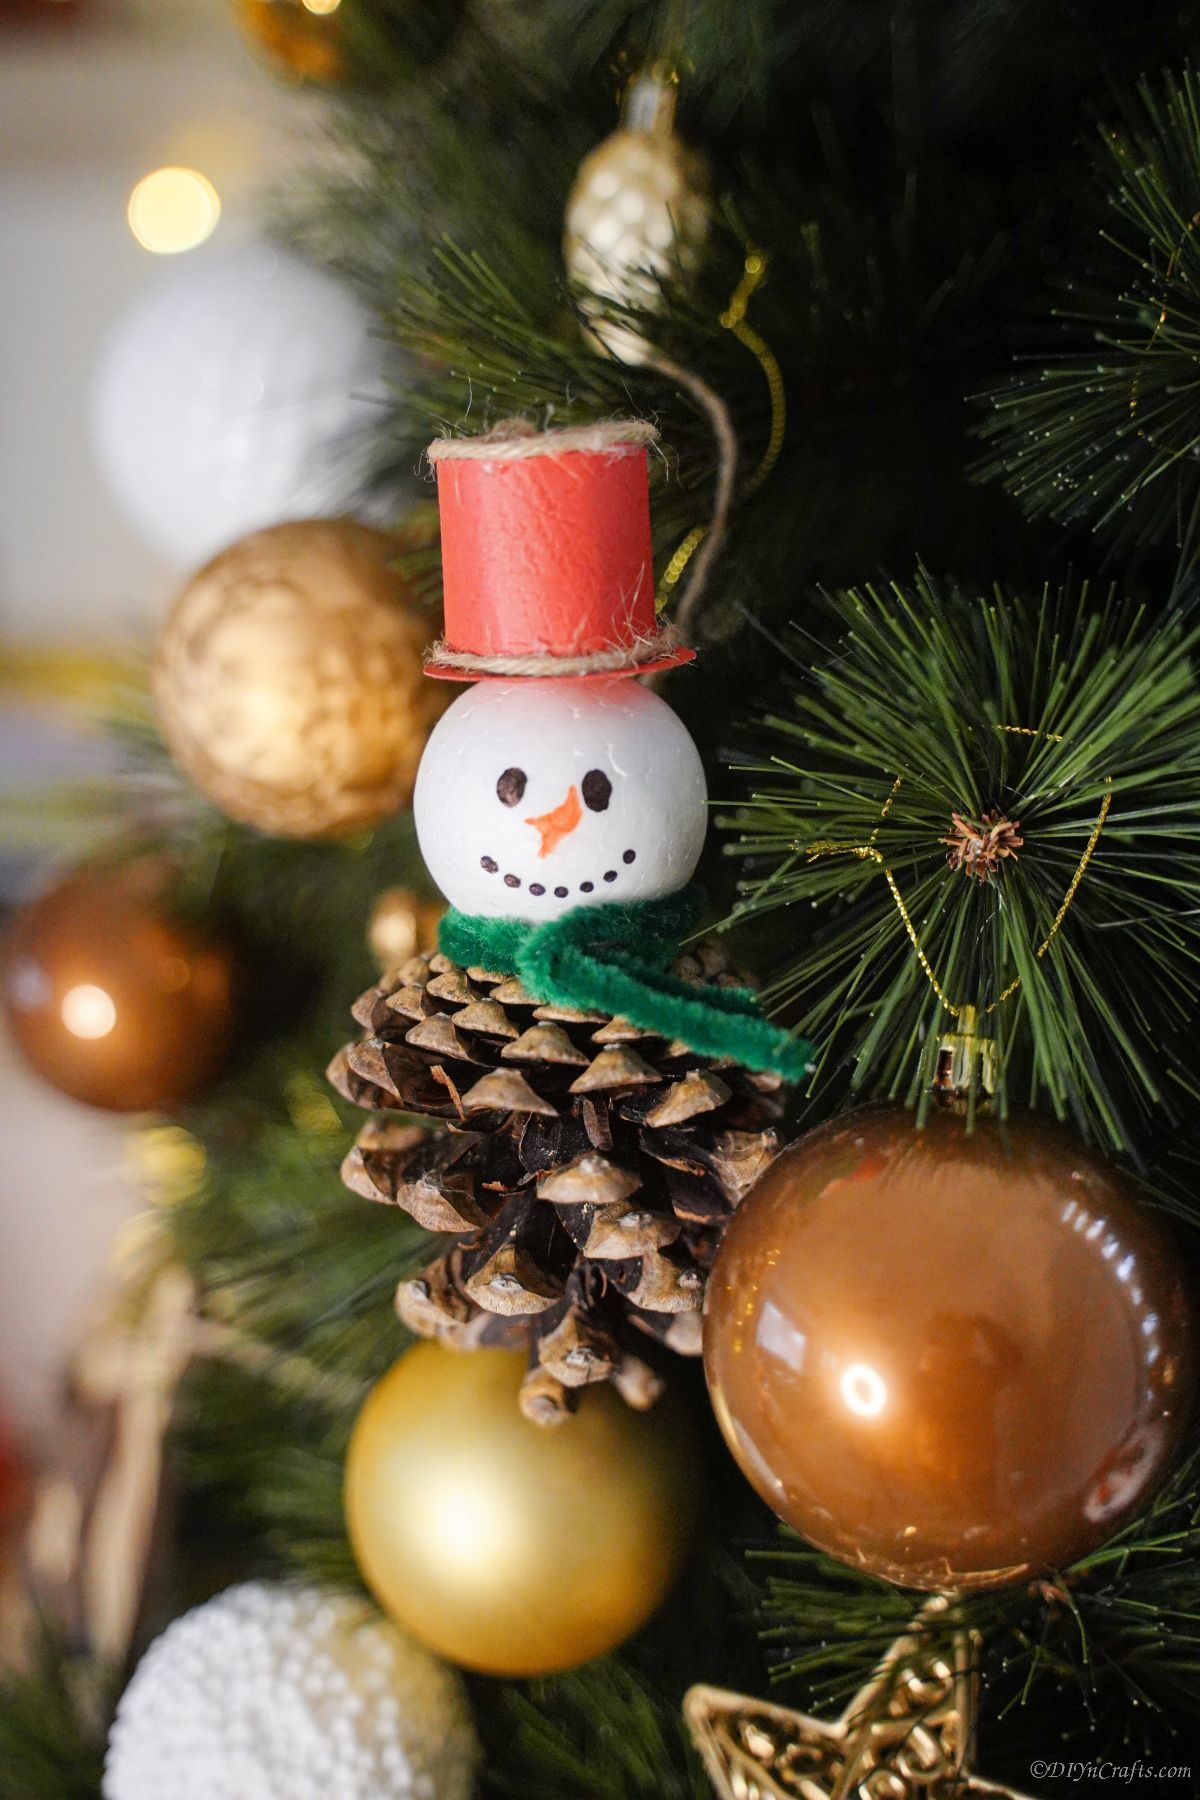 snowman ornament made of pinecone in Christmas tree